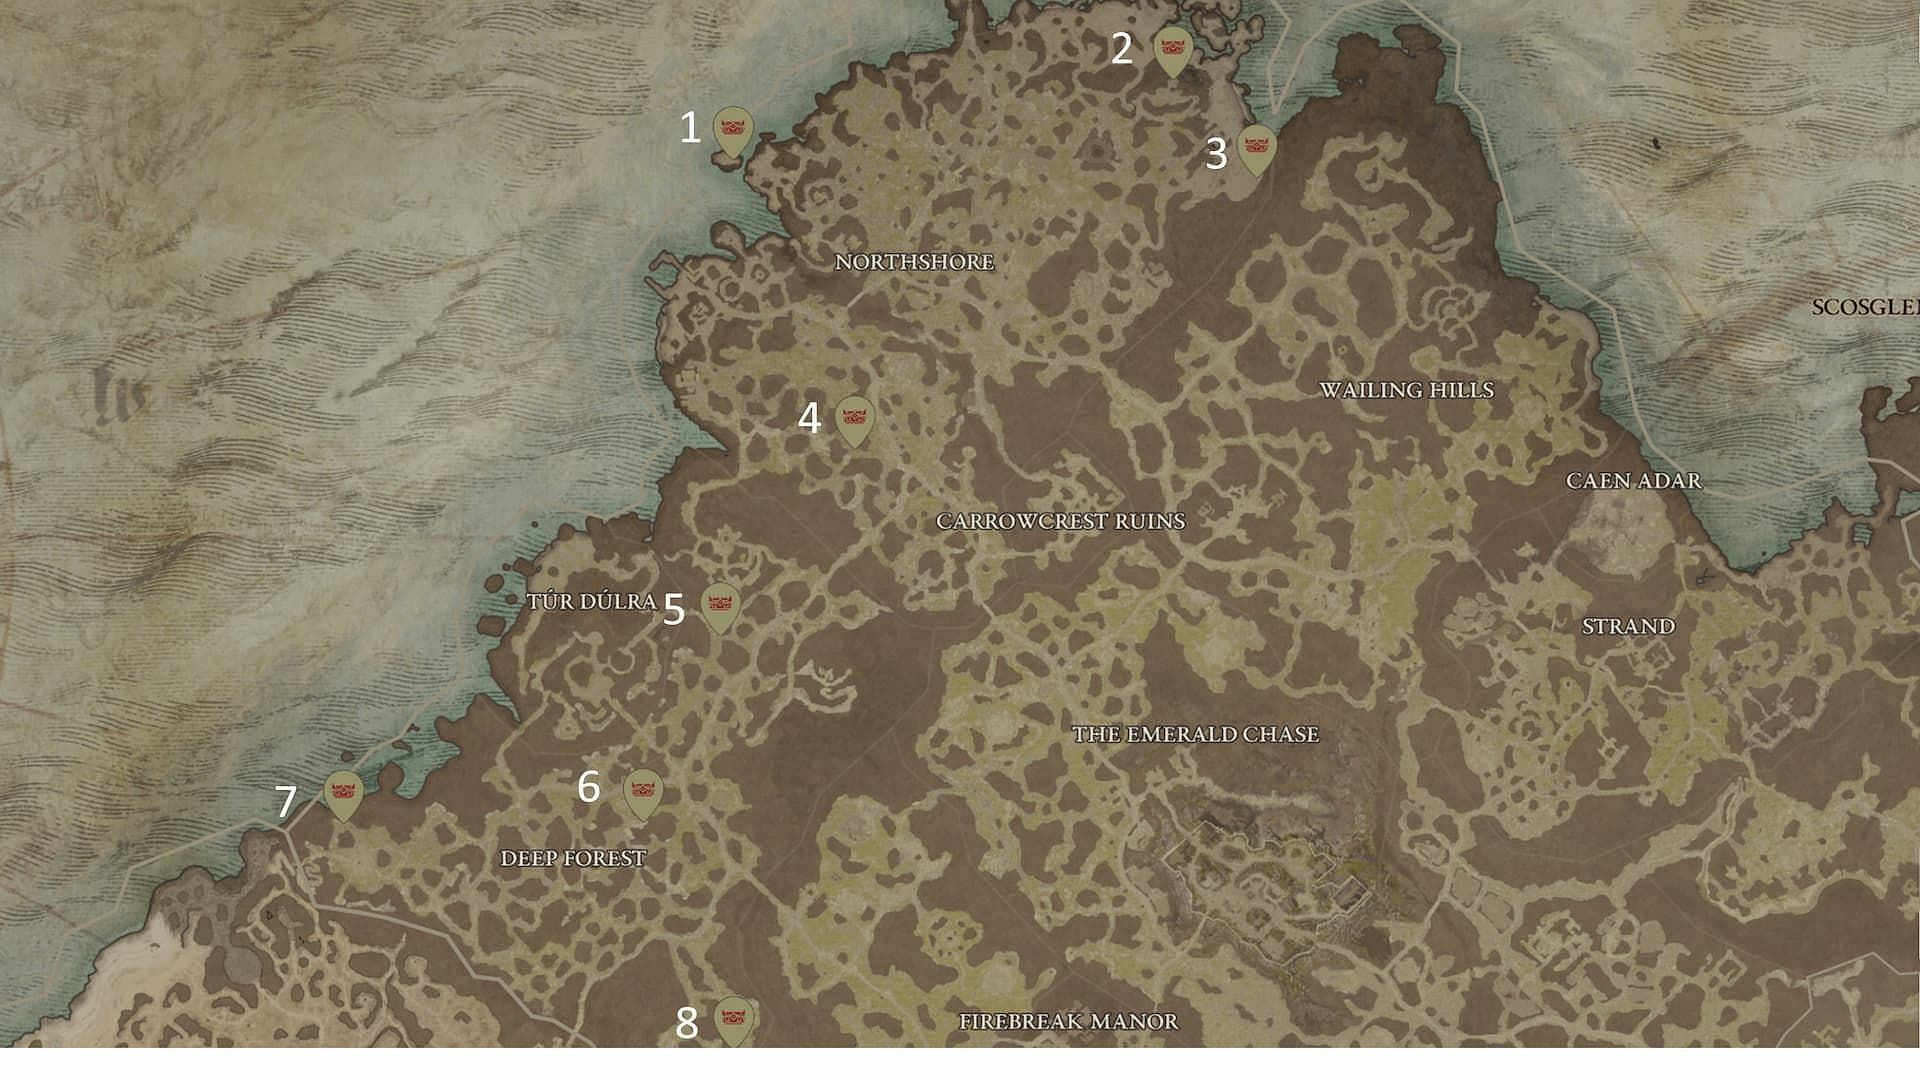 There are eight Mystery Chests spawn locations in Scosglen (Image via mapgenie.io)